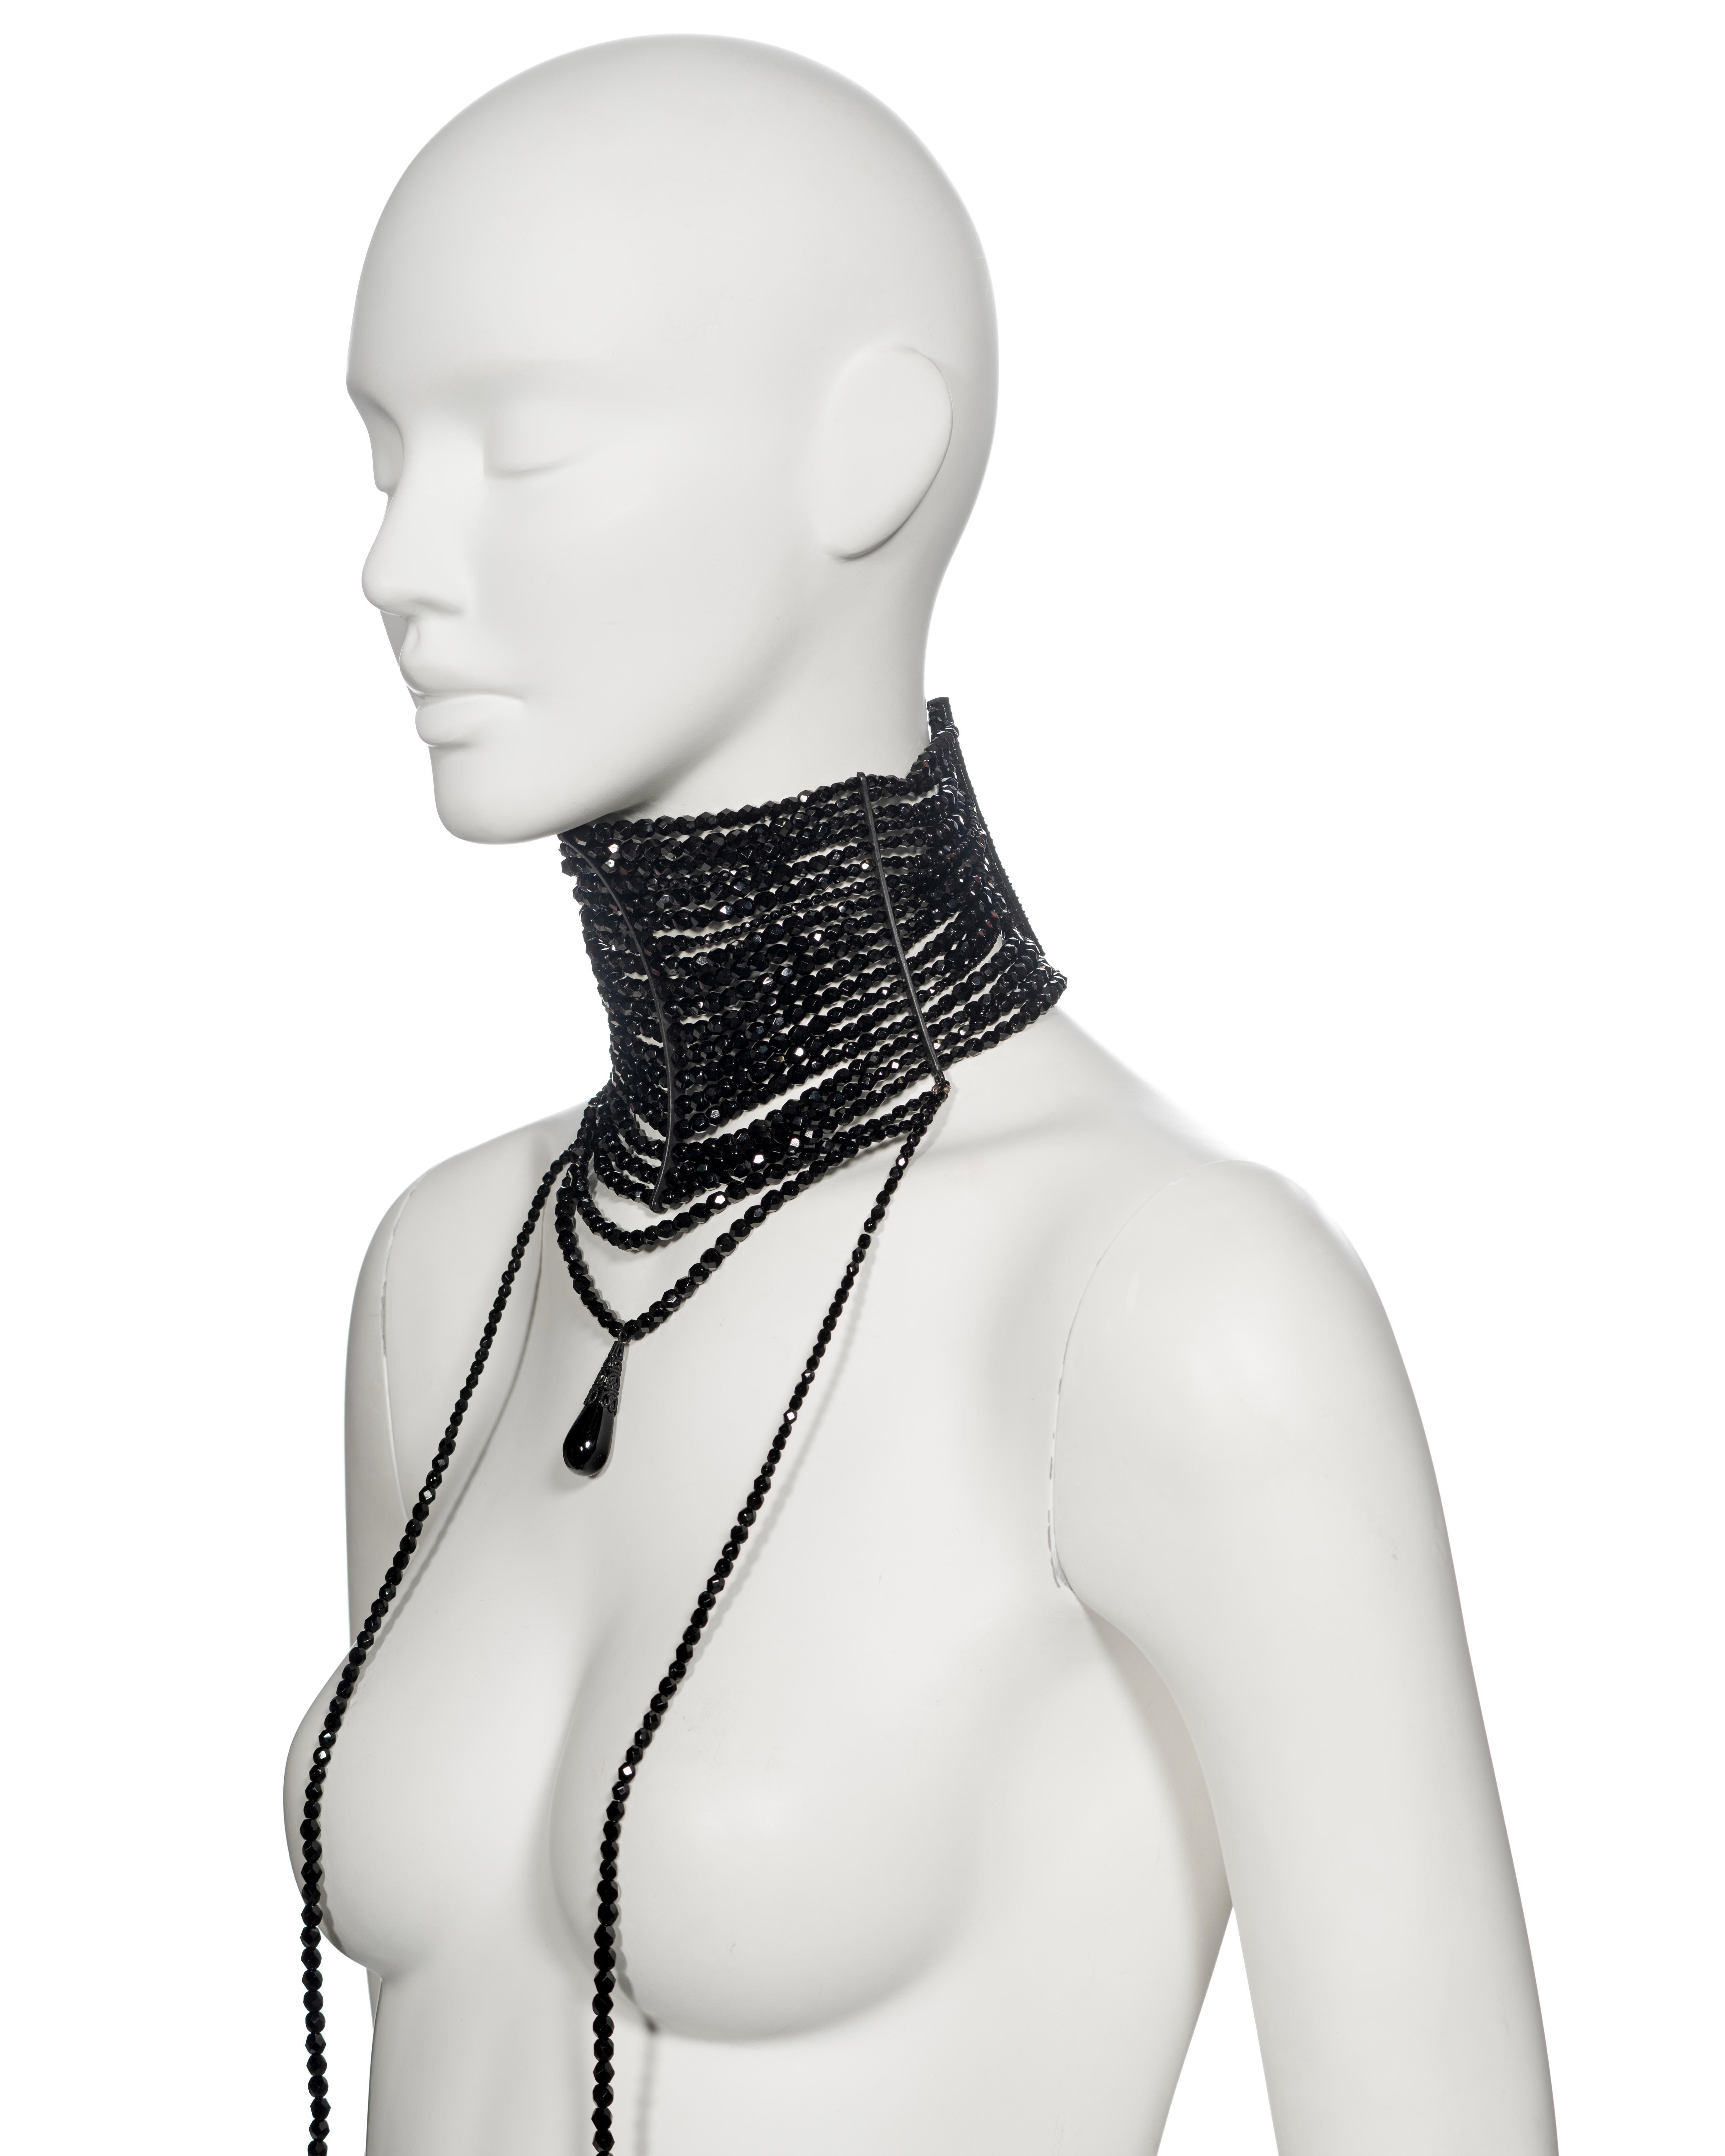 Christian Dior by John Galliano black beaded Masai choker necklace, ss 1999 For Sale 11